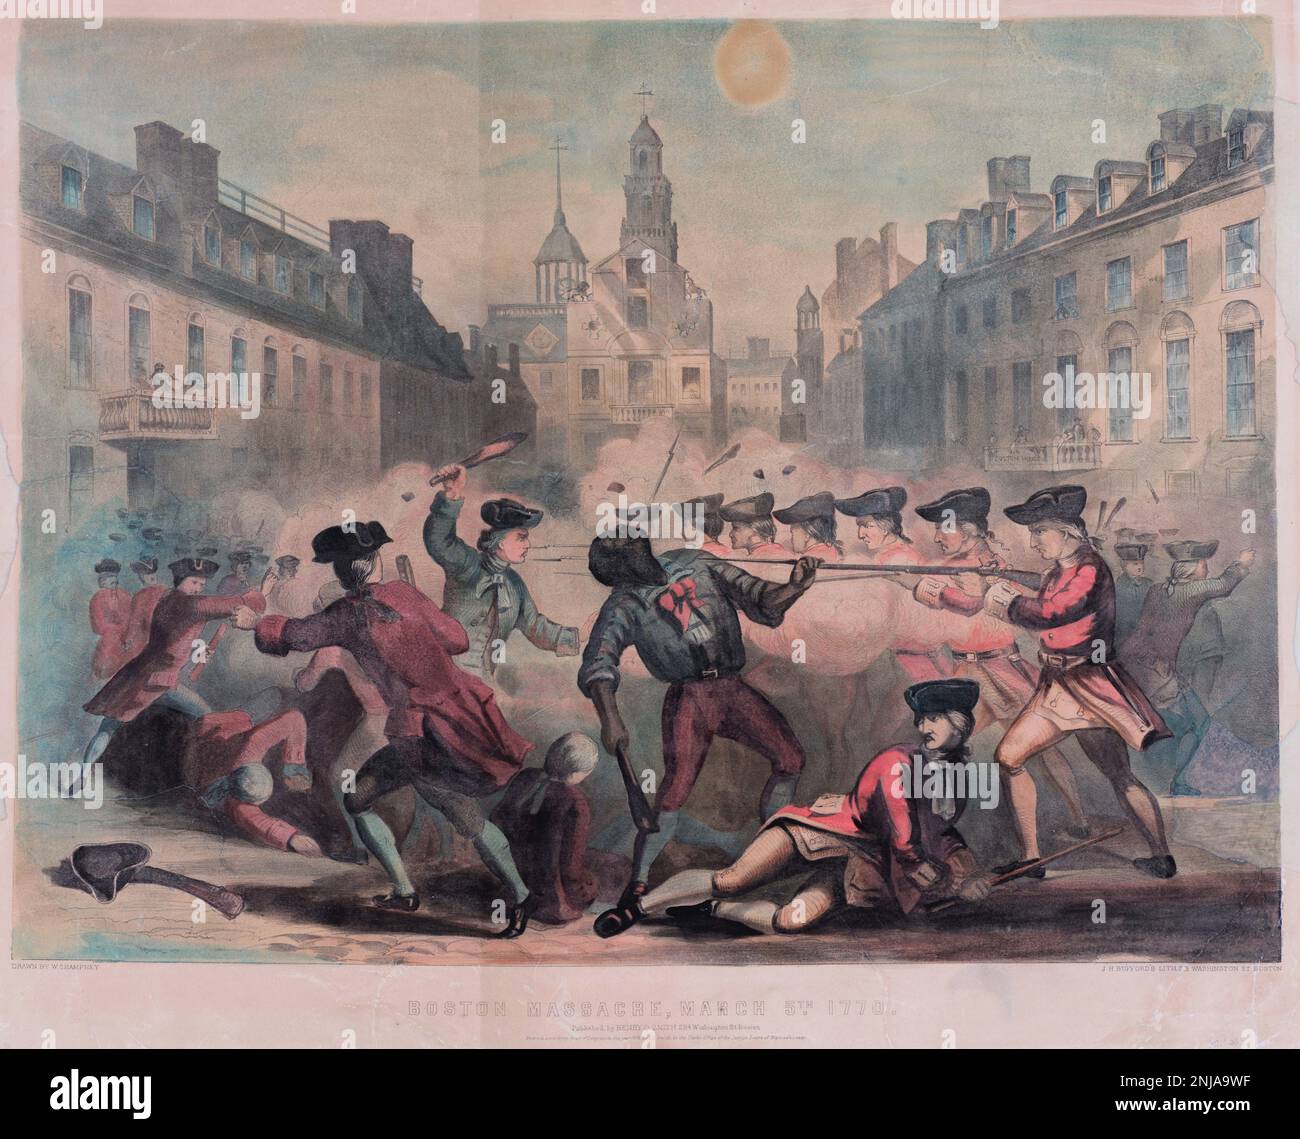 The Boston Massacre, was a confrontation in Boston on March 5, 1770, in which a group of nine British soldiers shot five people in a large crowd who were harassing them verbally and throwing various objects, vintage illustration from 1856 Stock Photo